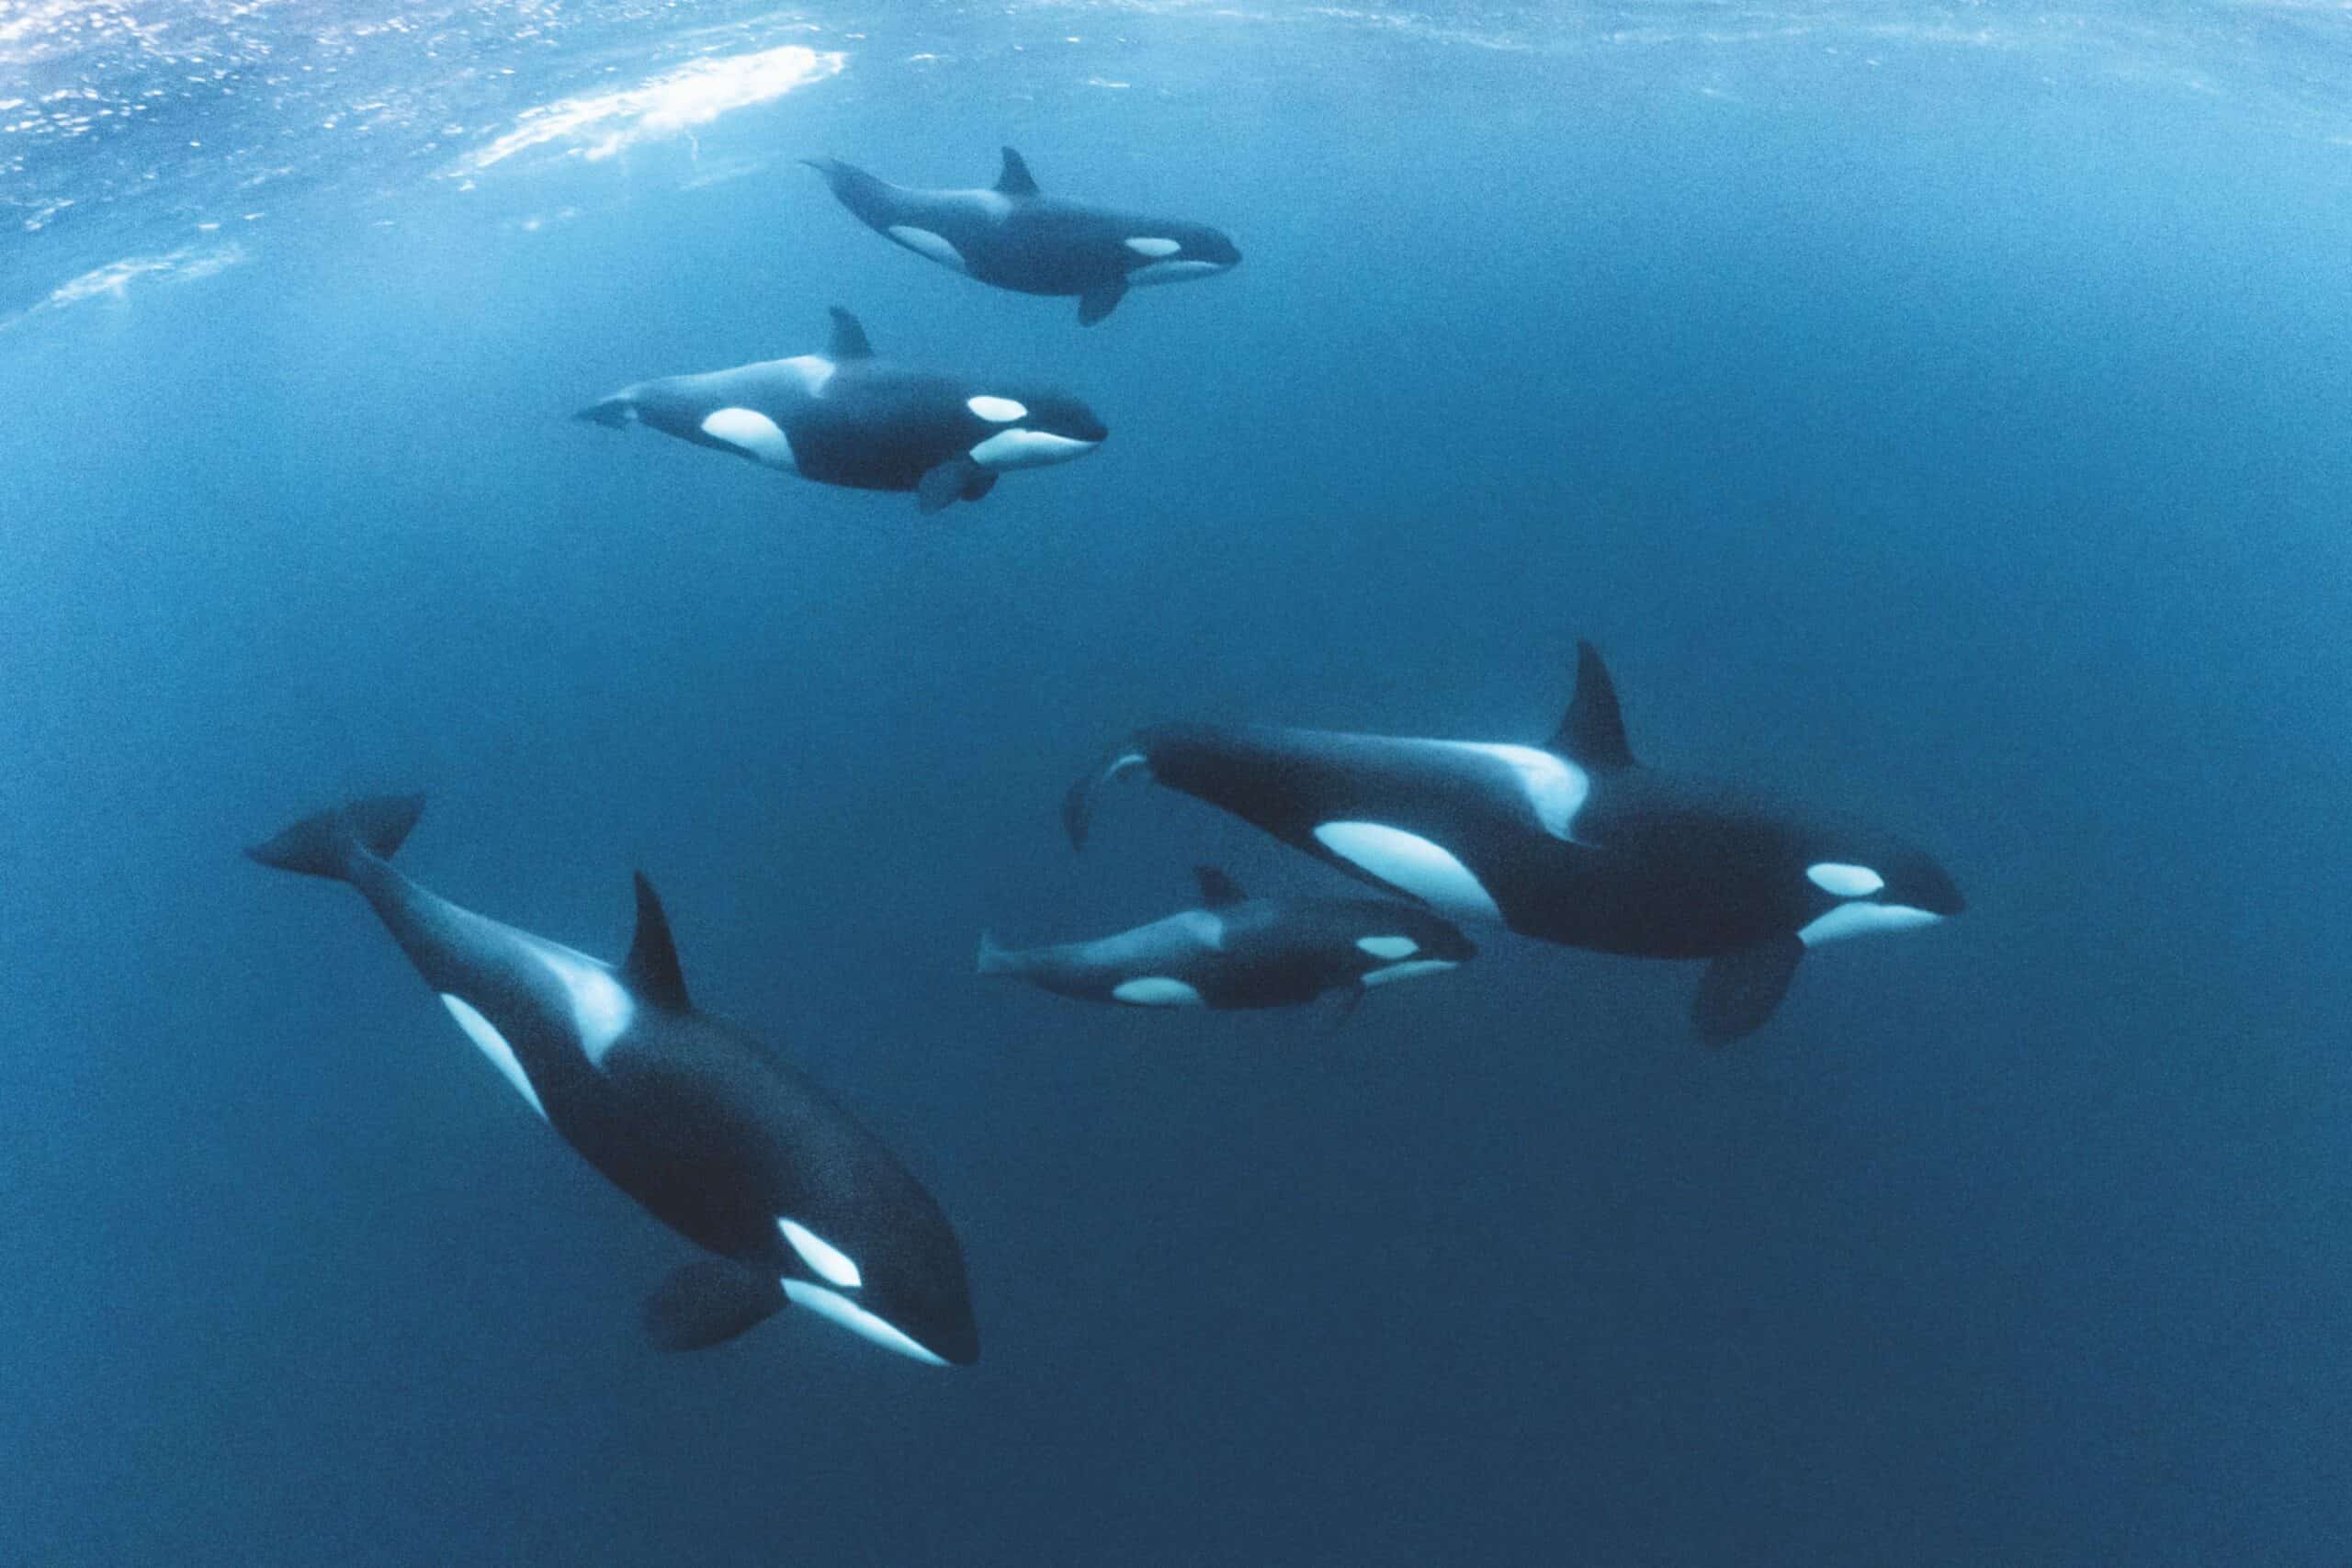 Orcas or killer whales hunting in pods